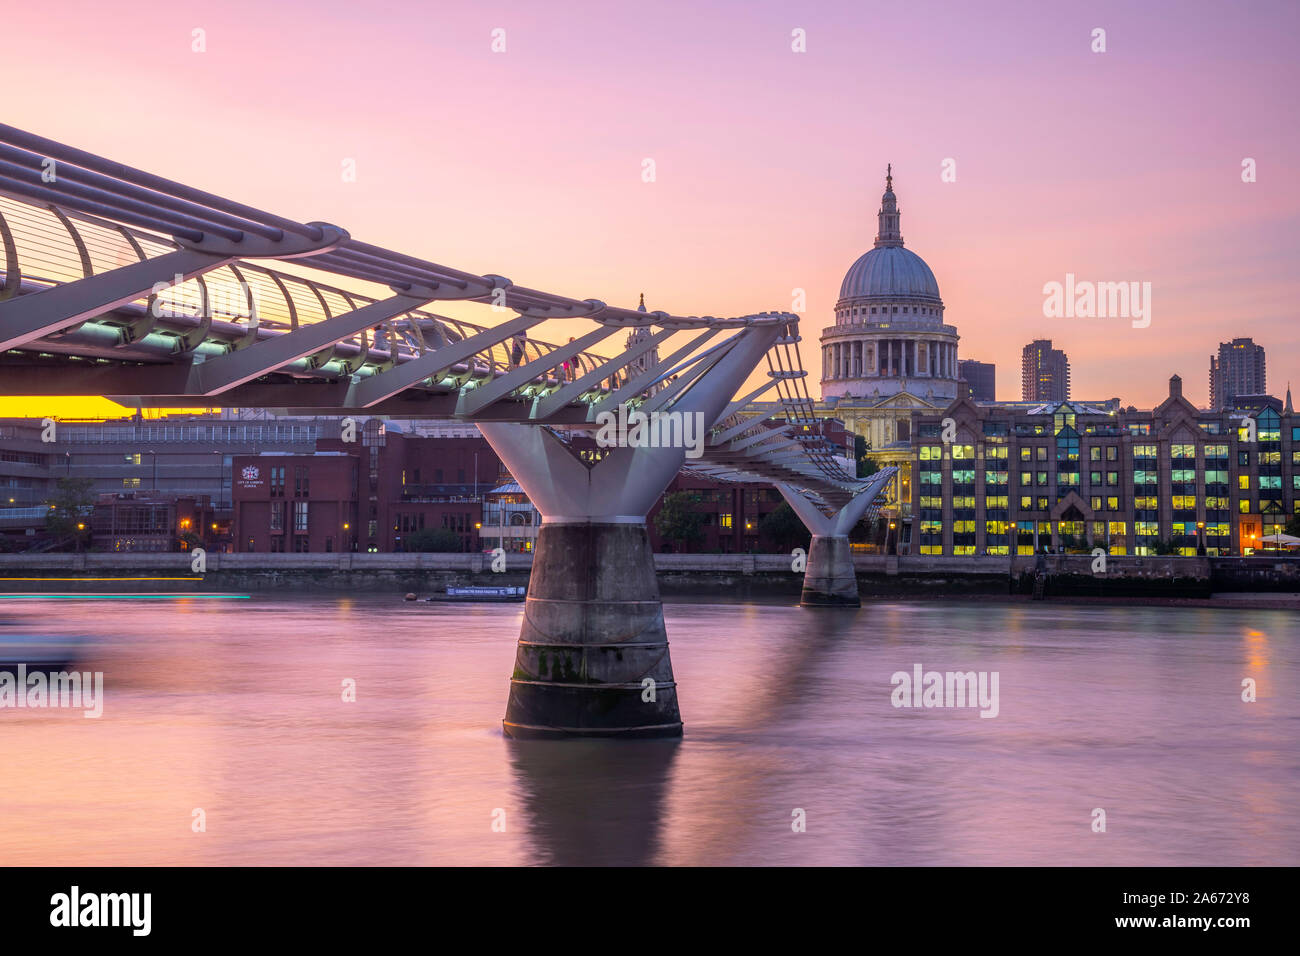 UK, England, London, Millennium Bridge over River Thames and St. Paul's Cathedral Stock Photo